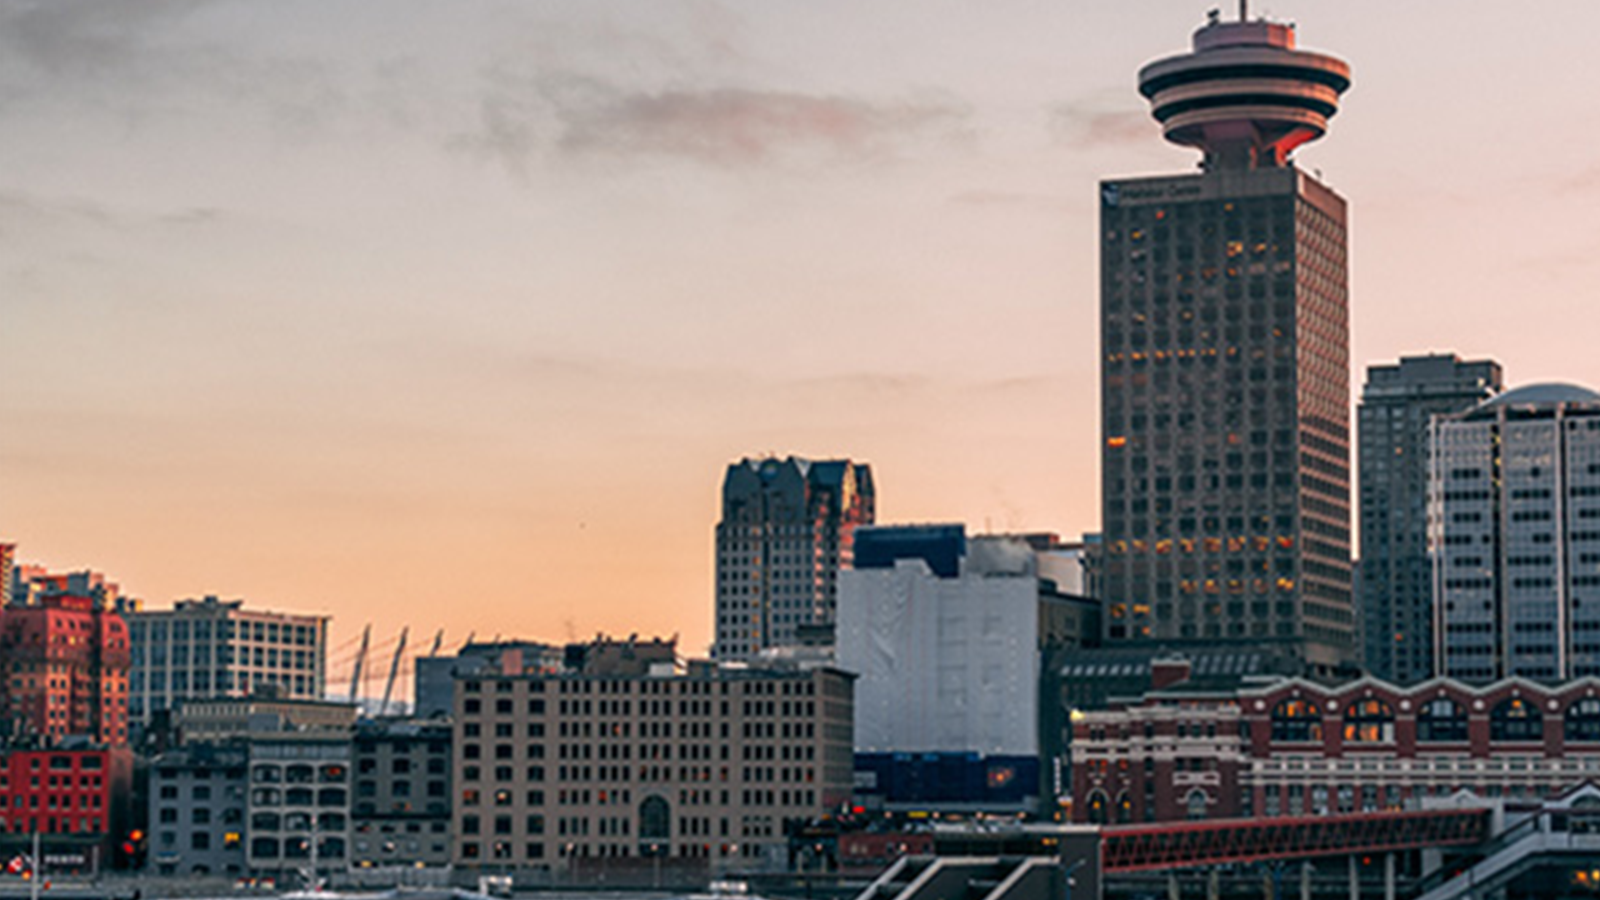 Innovate BC and Vancouver Entrepreneurs Forum partner to bring tech community together